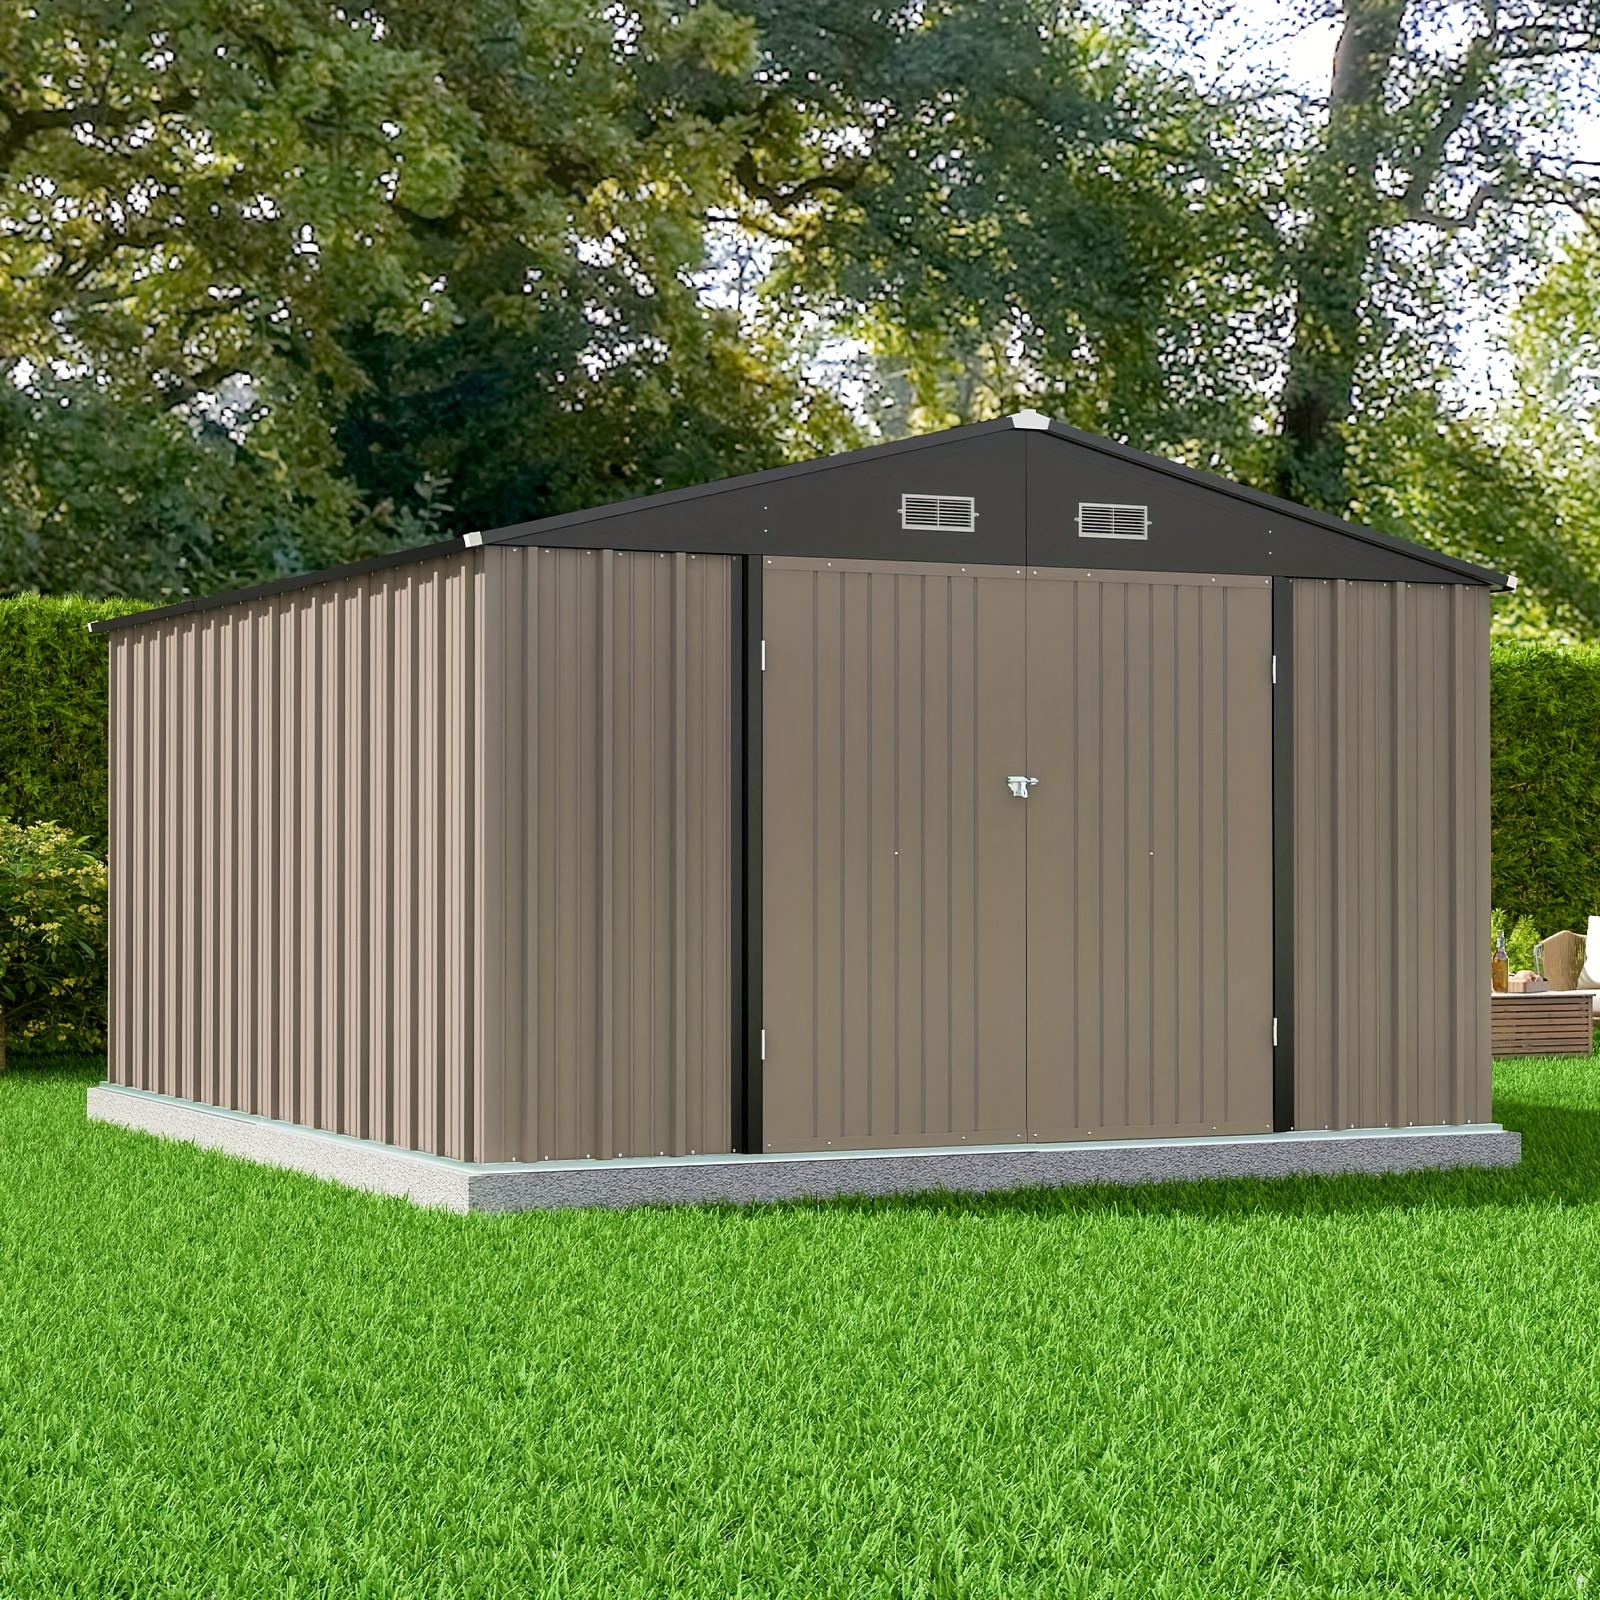 

10x12 Ft Metal Storage Shed For Outdoor, Steel Yard Shed With Design Of Lockable Doors, Utility And Tool Storage For Garden, Backyard, Patio, Outside Use